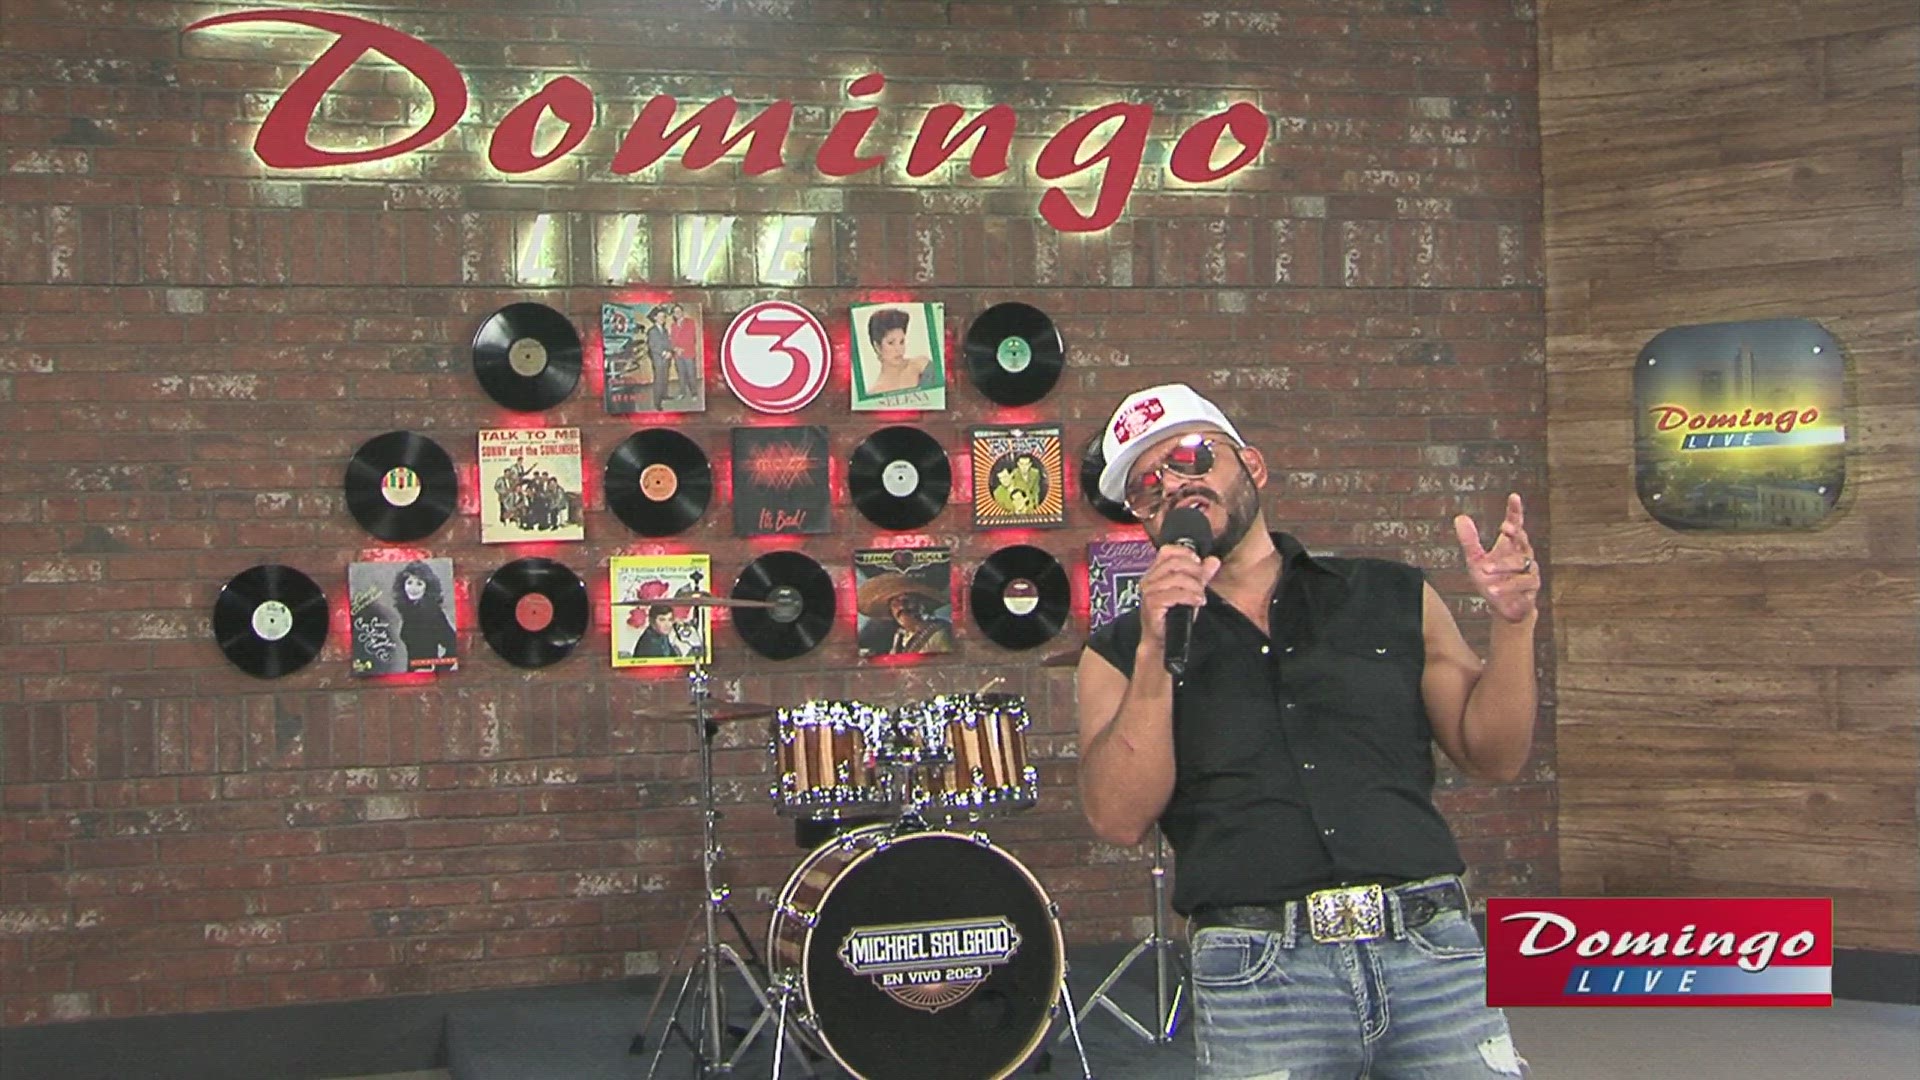 Michael Salgado joined us on Domingo Live to perform his song "She Thinks My Name is Whiskey."